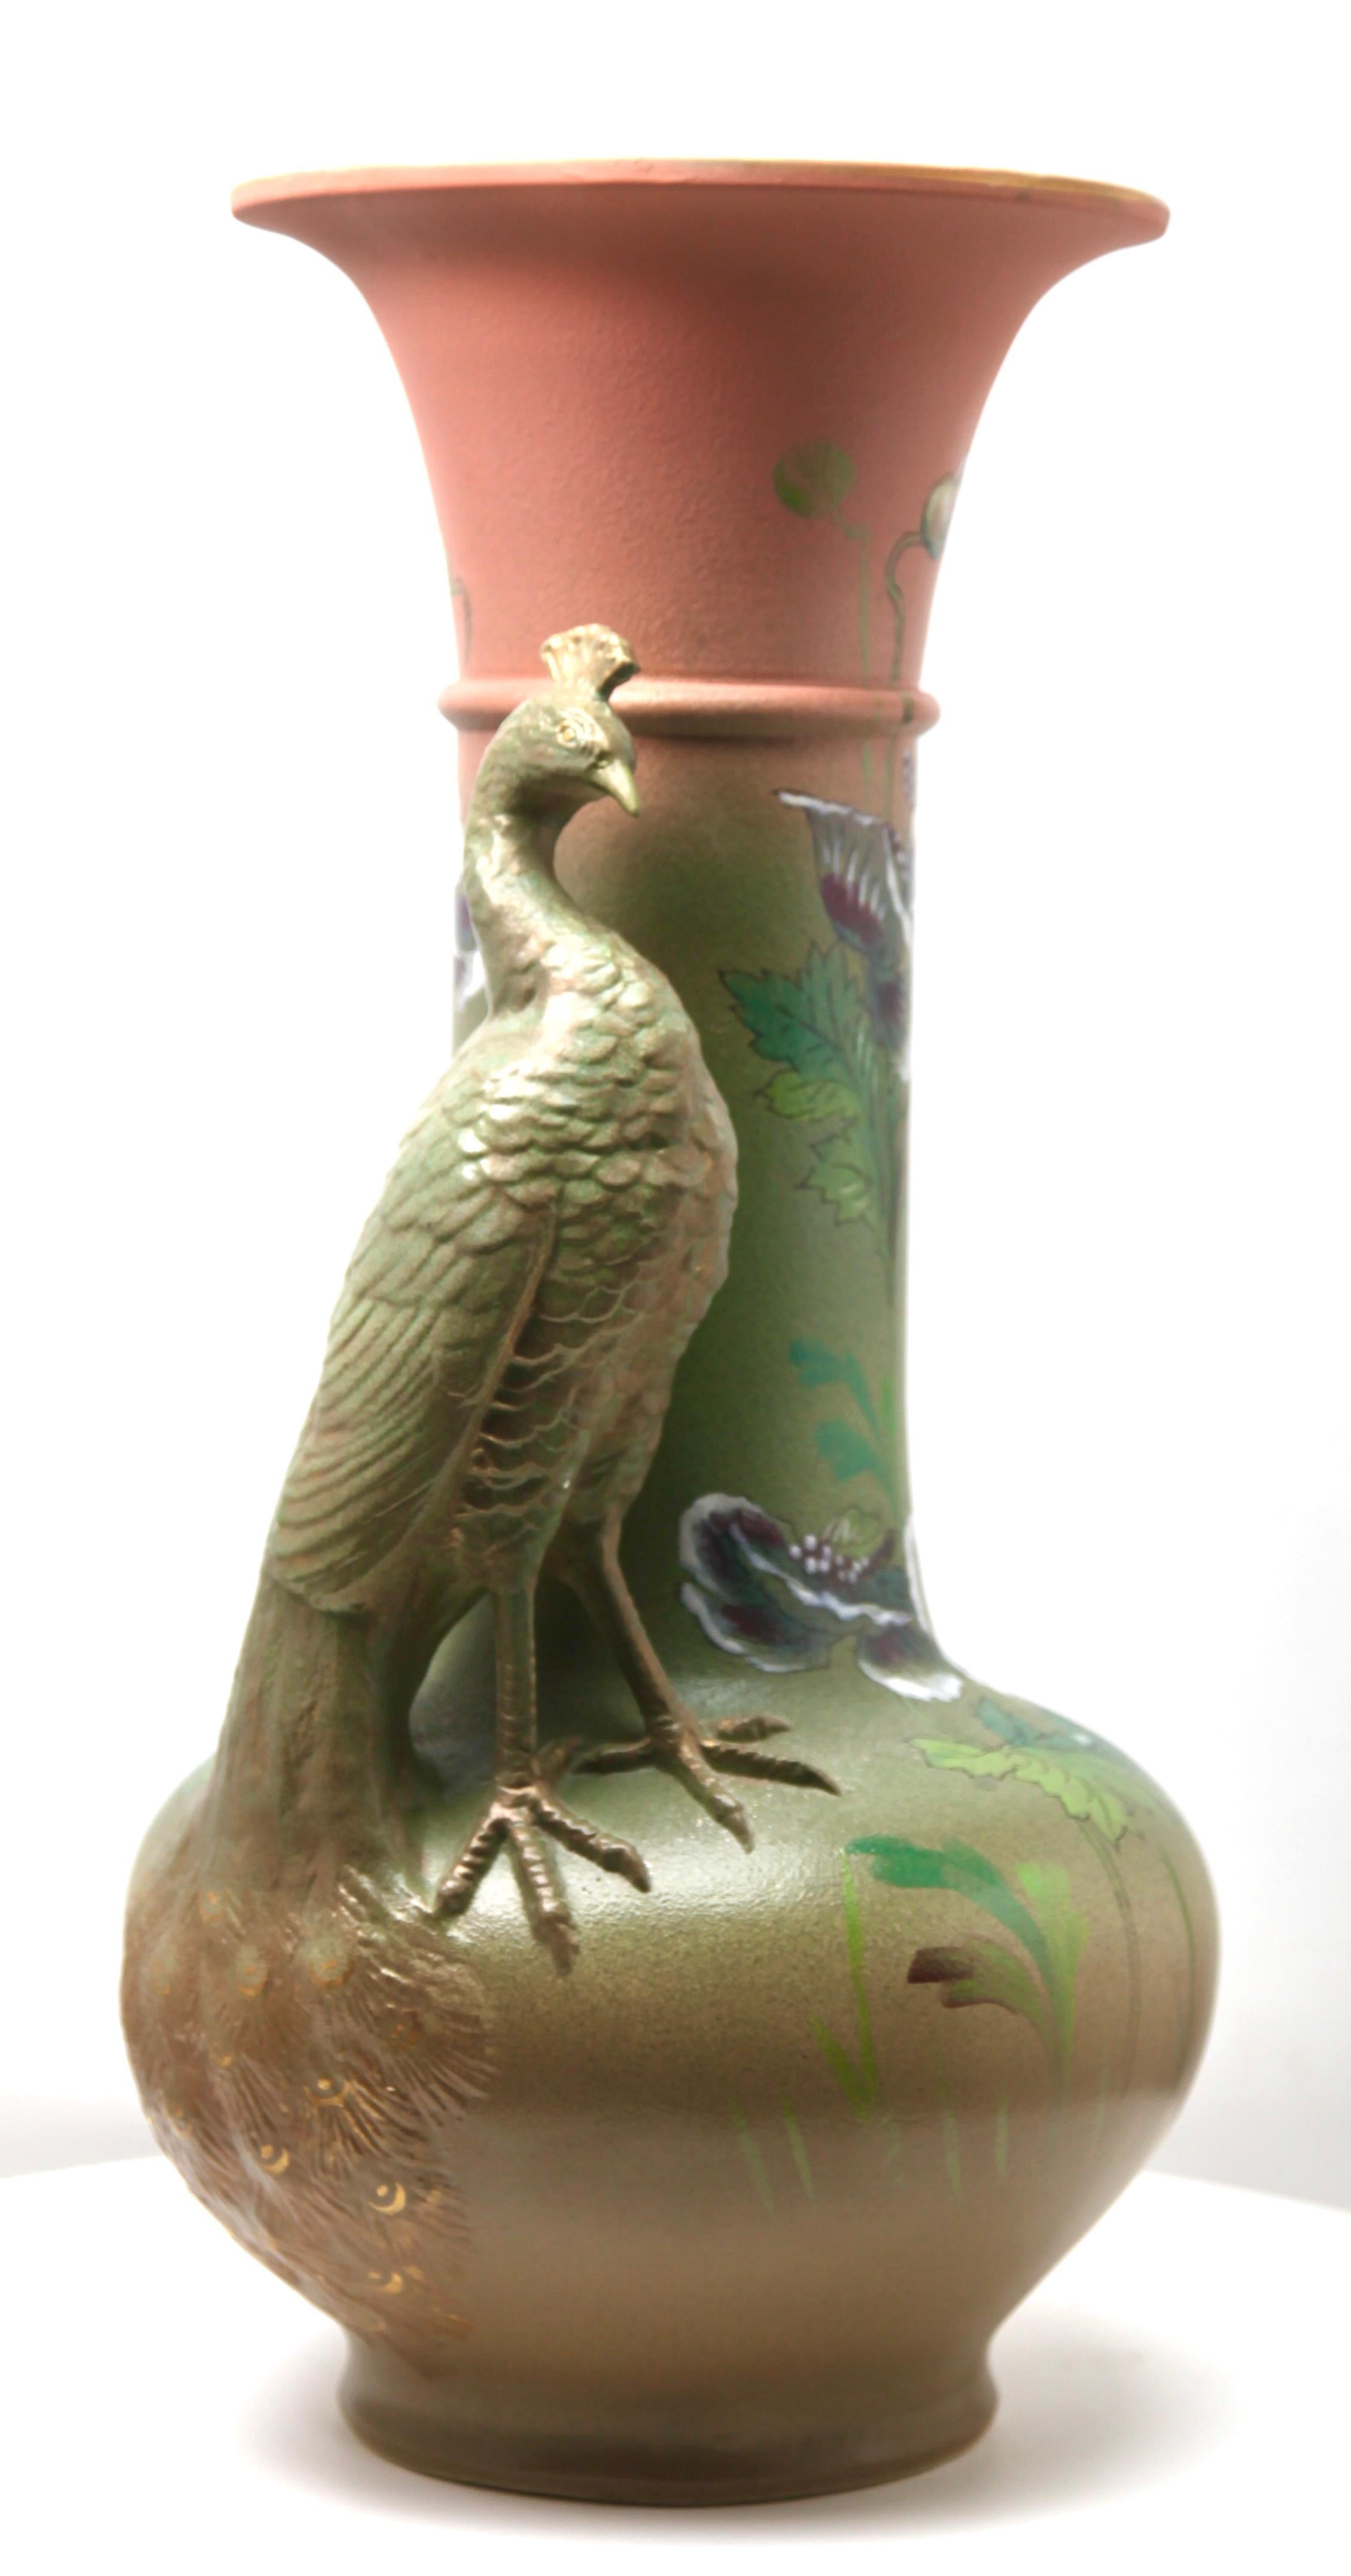 Belgian Large Art Nouveau Vase with a Sculpted Peacock and 'Opium' Poppies For Sale